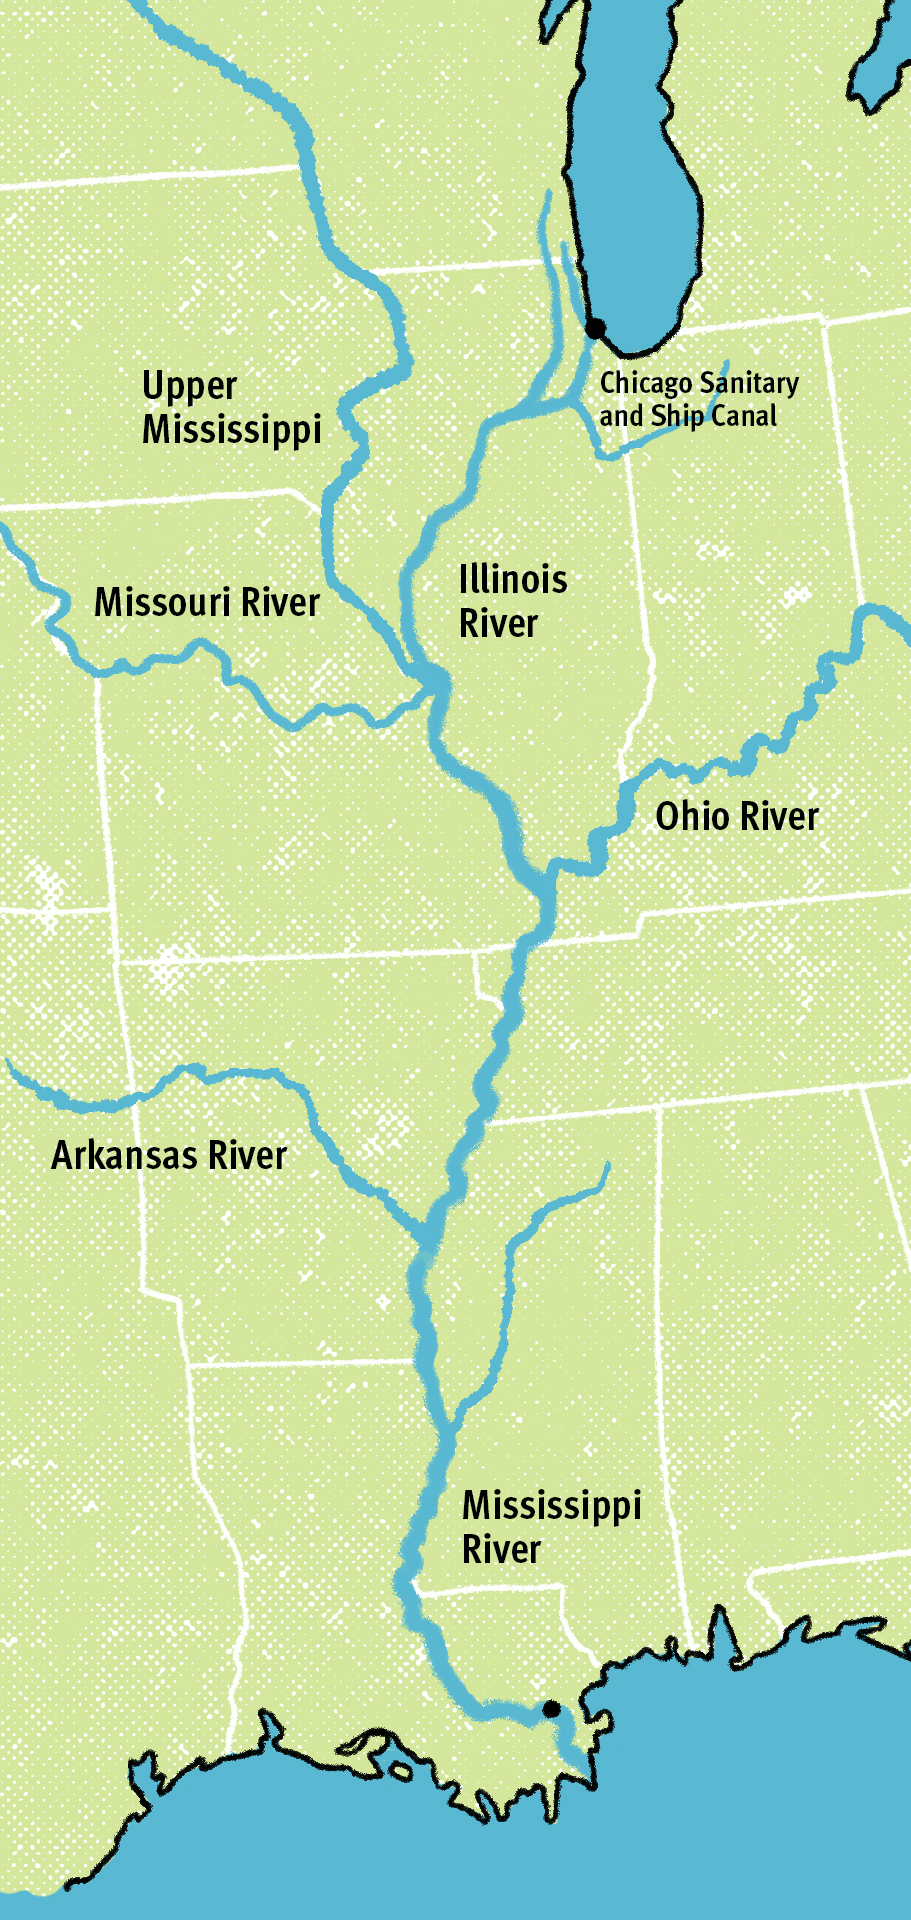 A map in blue and green shows the Mississippi River basin, including the main tributaries and the waterways in Chicago